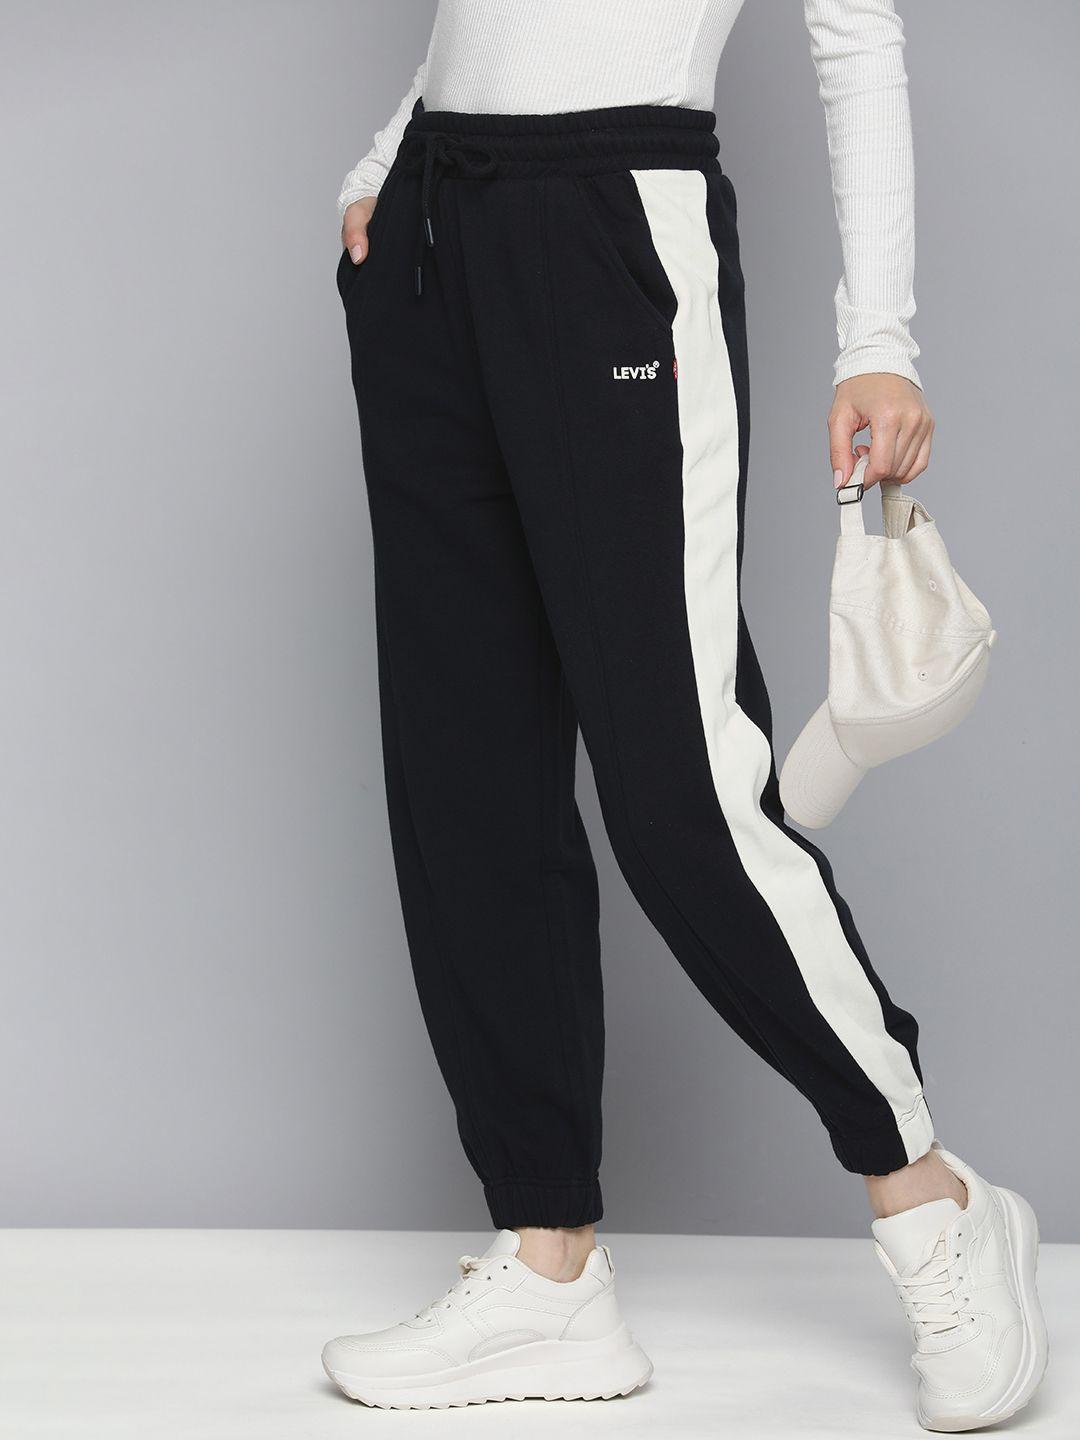 levis-women-high-rise-joggers-trousers